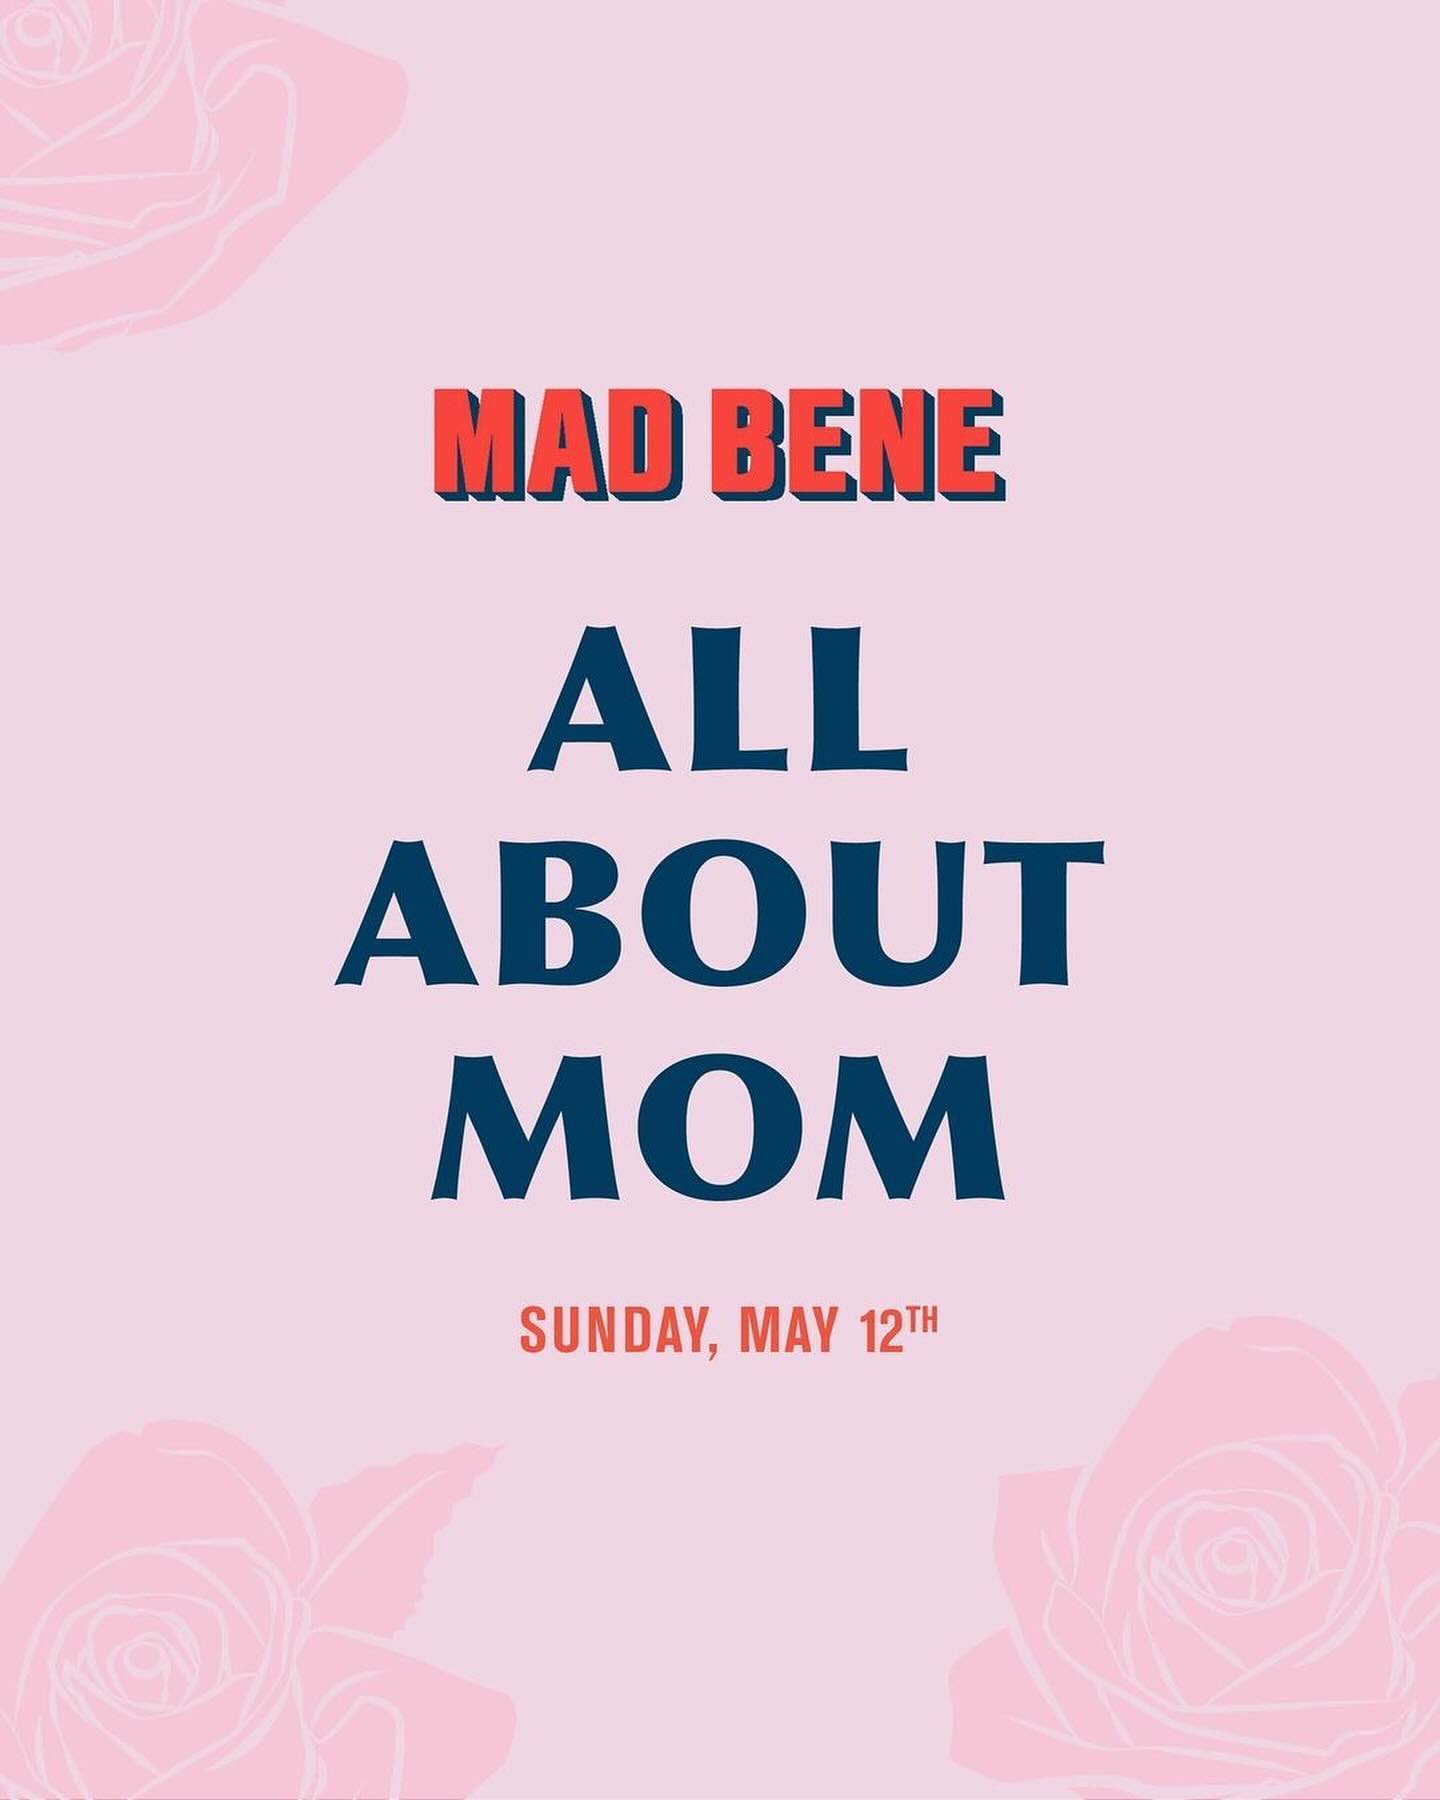 Treat Mom to a memorable Mother&rsquo;s Day at @Mad.Bene! Indulge in their special 3-course menu, featuring half-off bottles of wine. Start with a Caesar Salad or Hamachi Crudo, then savor a main course of King Crab Pasta, Pork Chop Marsala, or Eggpl